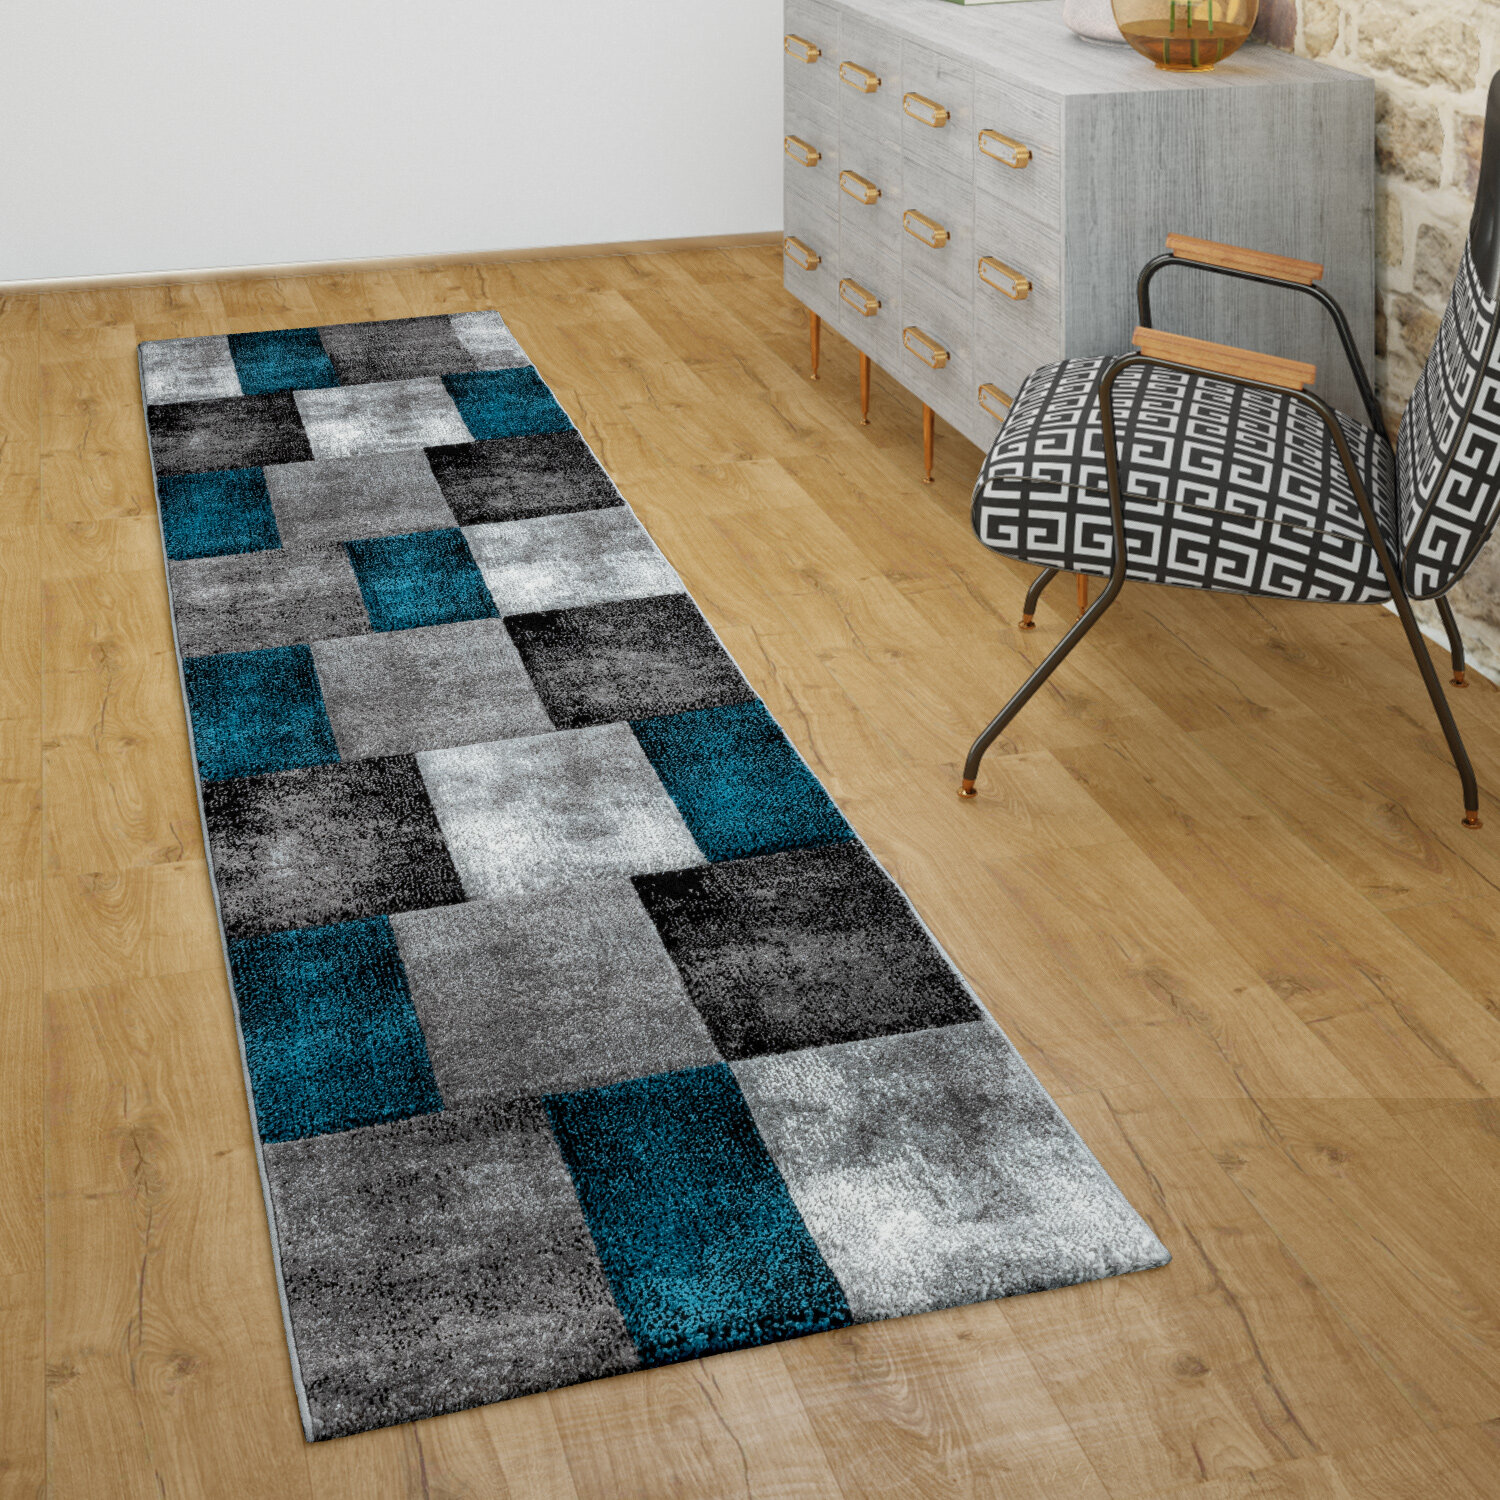 Geometric Rug Blue Brown Black Check Mat Woven Small X Large Bedroom Area Carpet 